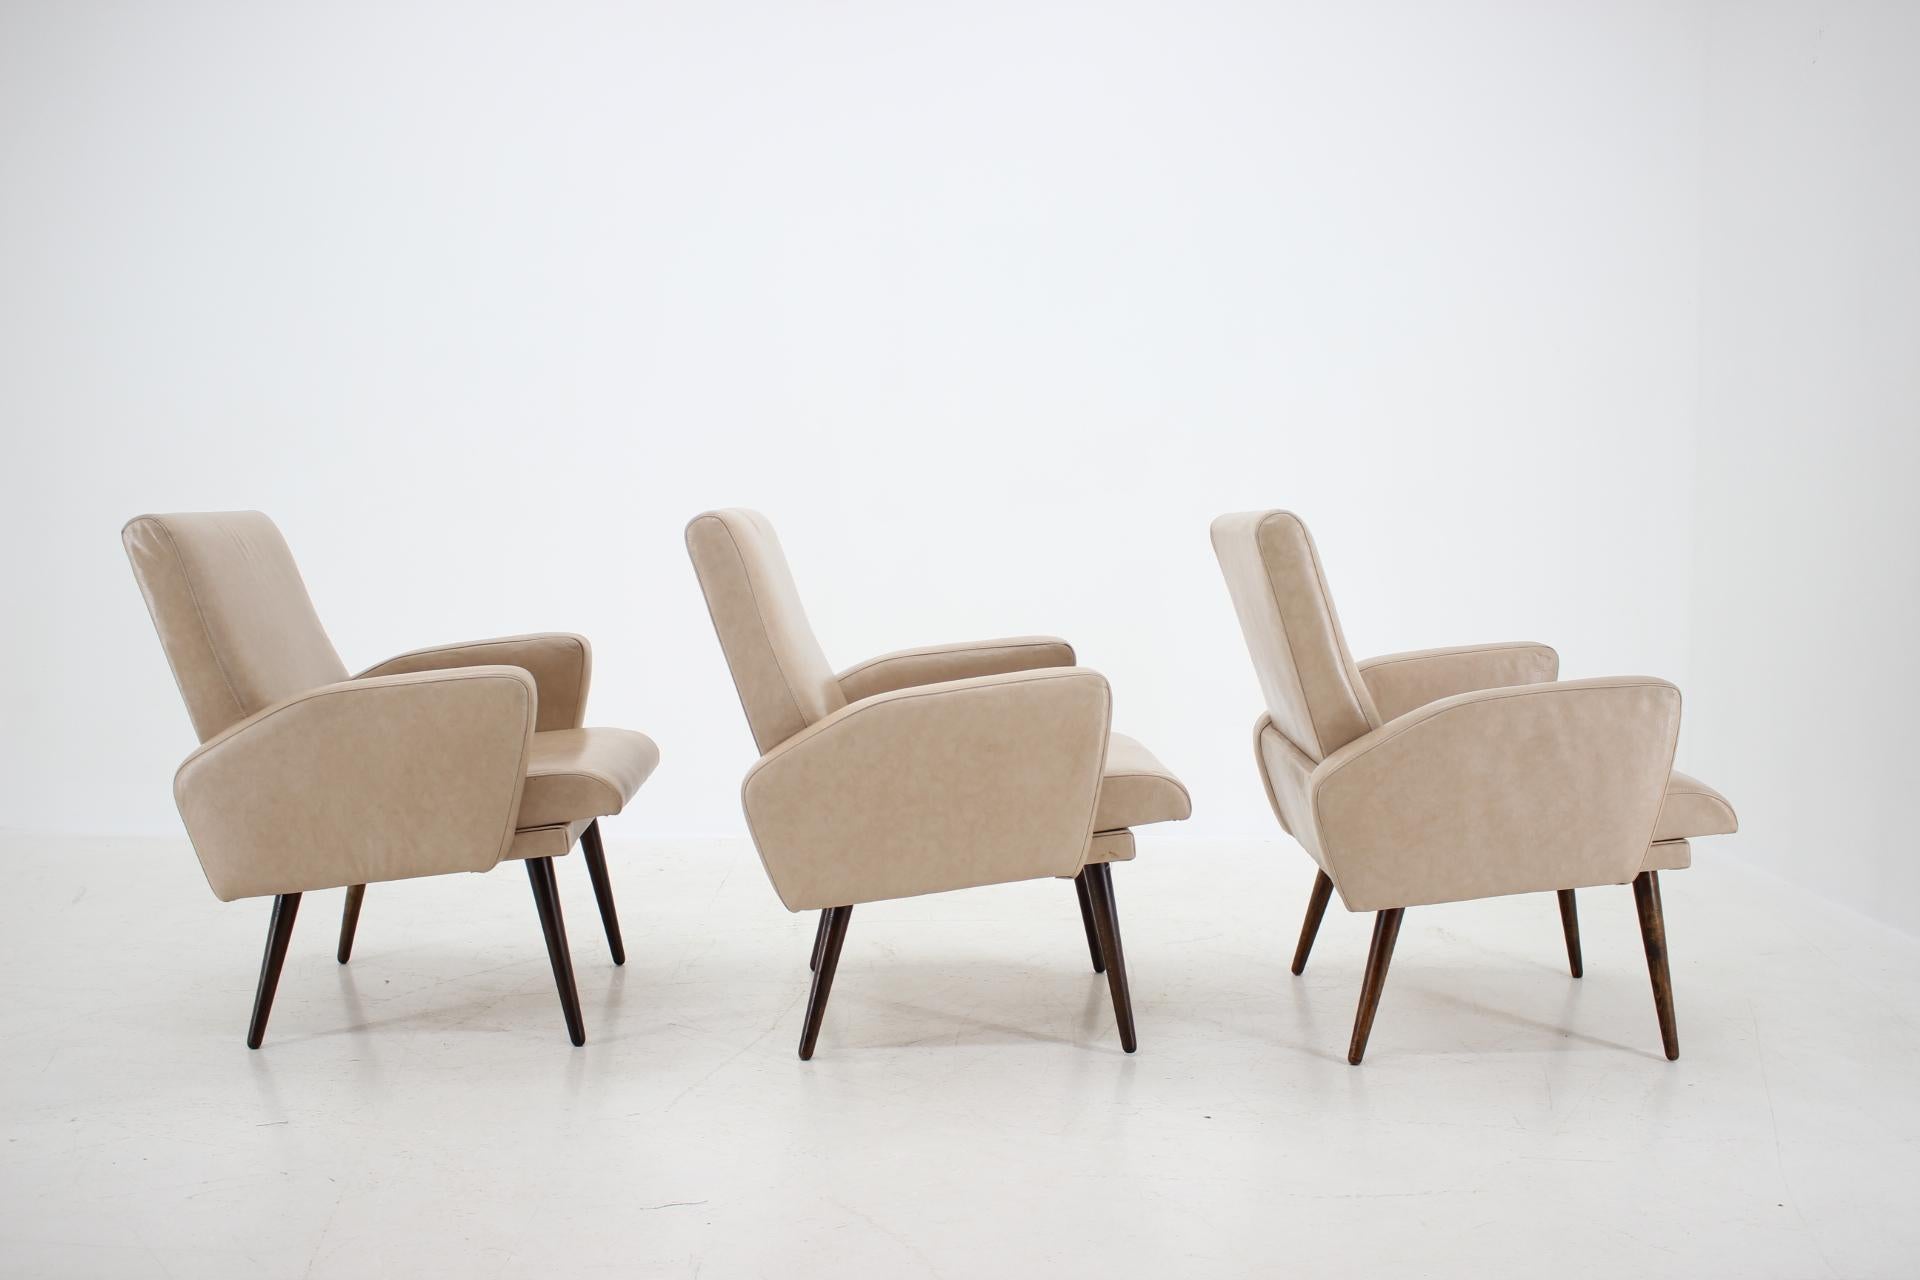 Late 20th Century Midcentury Leather Armchairs Designed by Miroslav Navrátil, 1970s